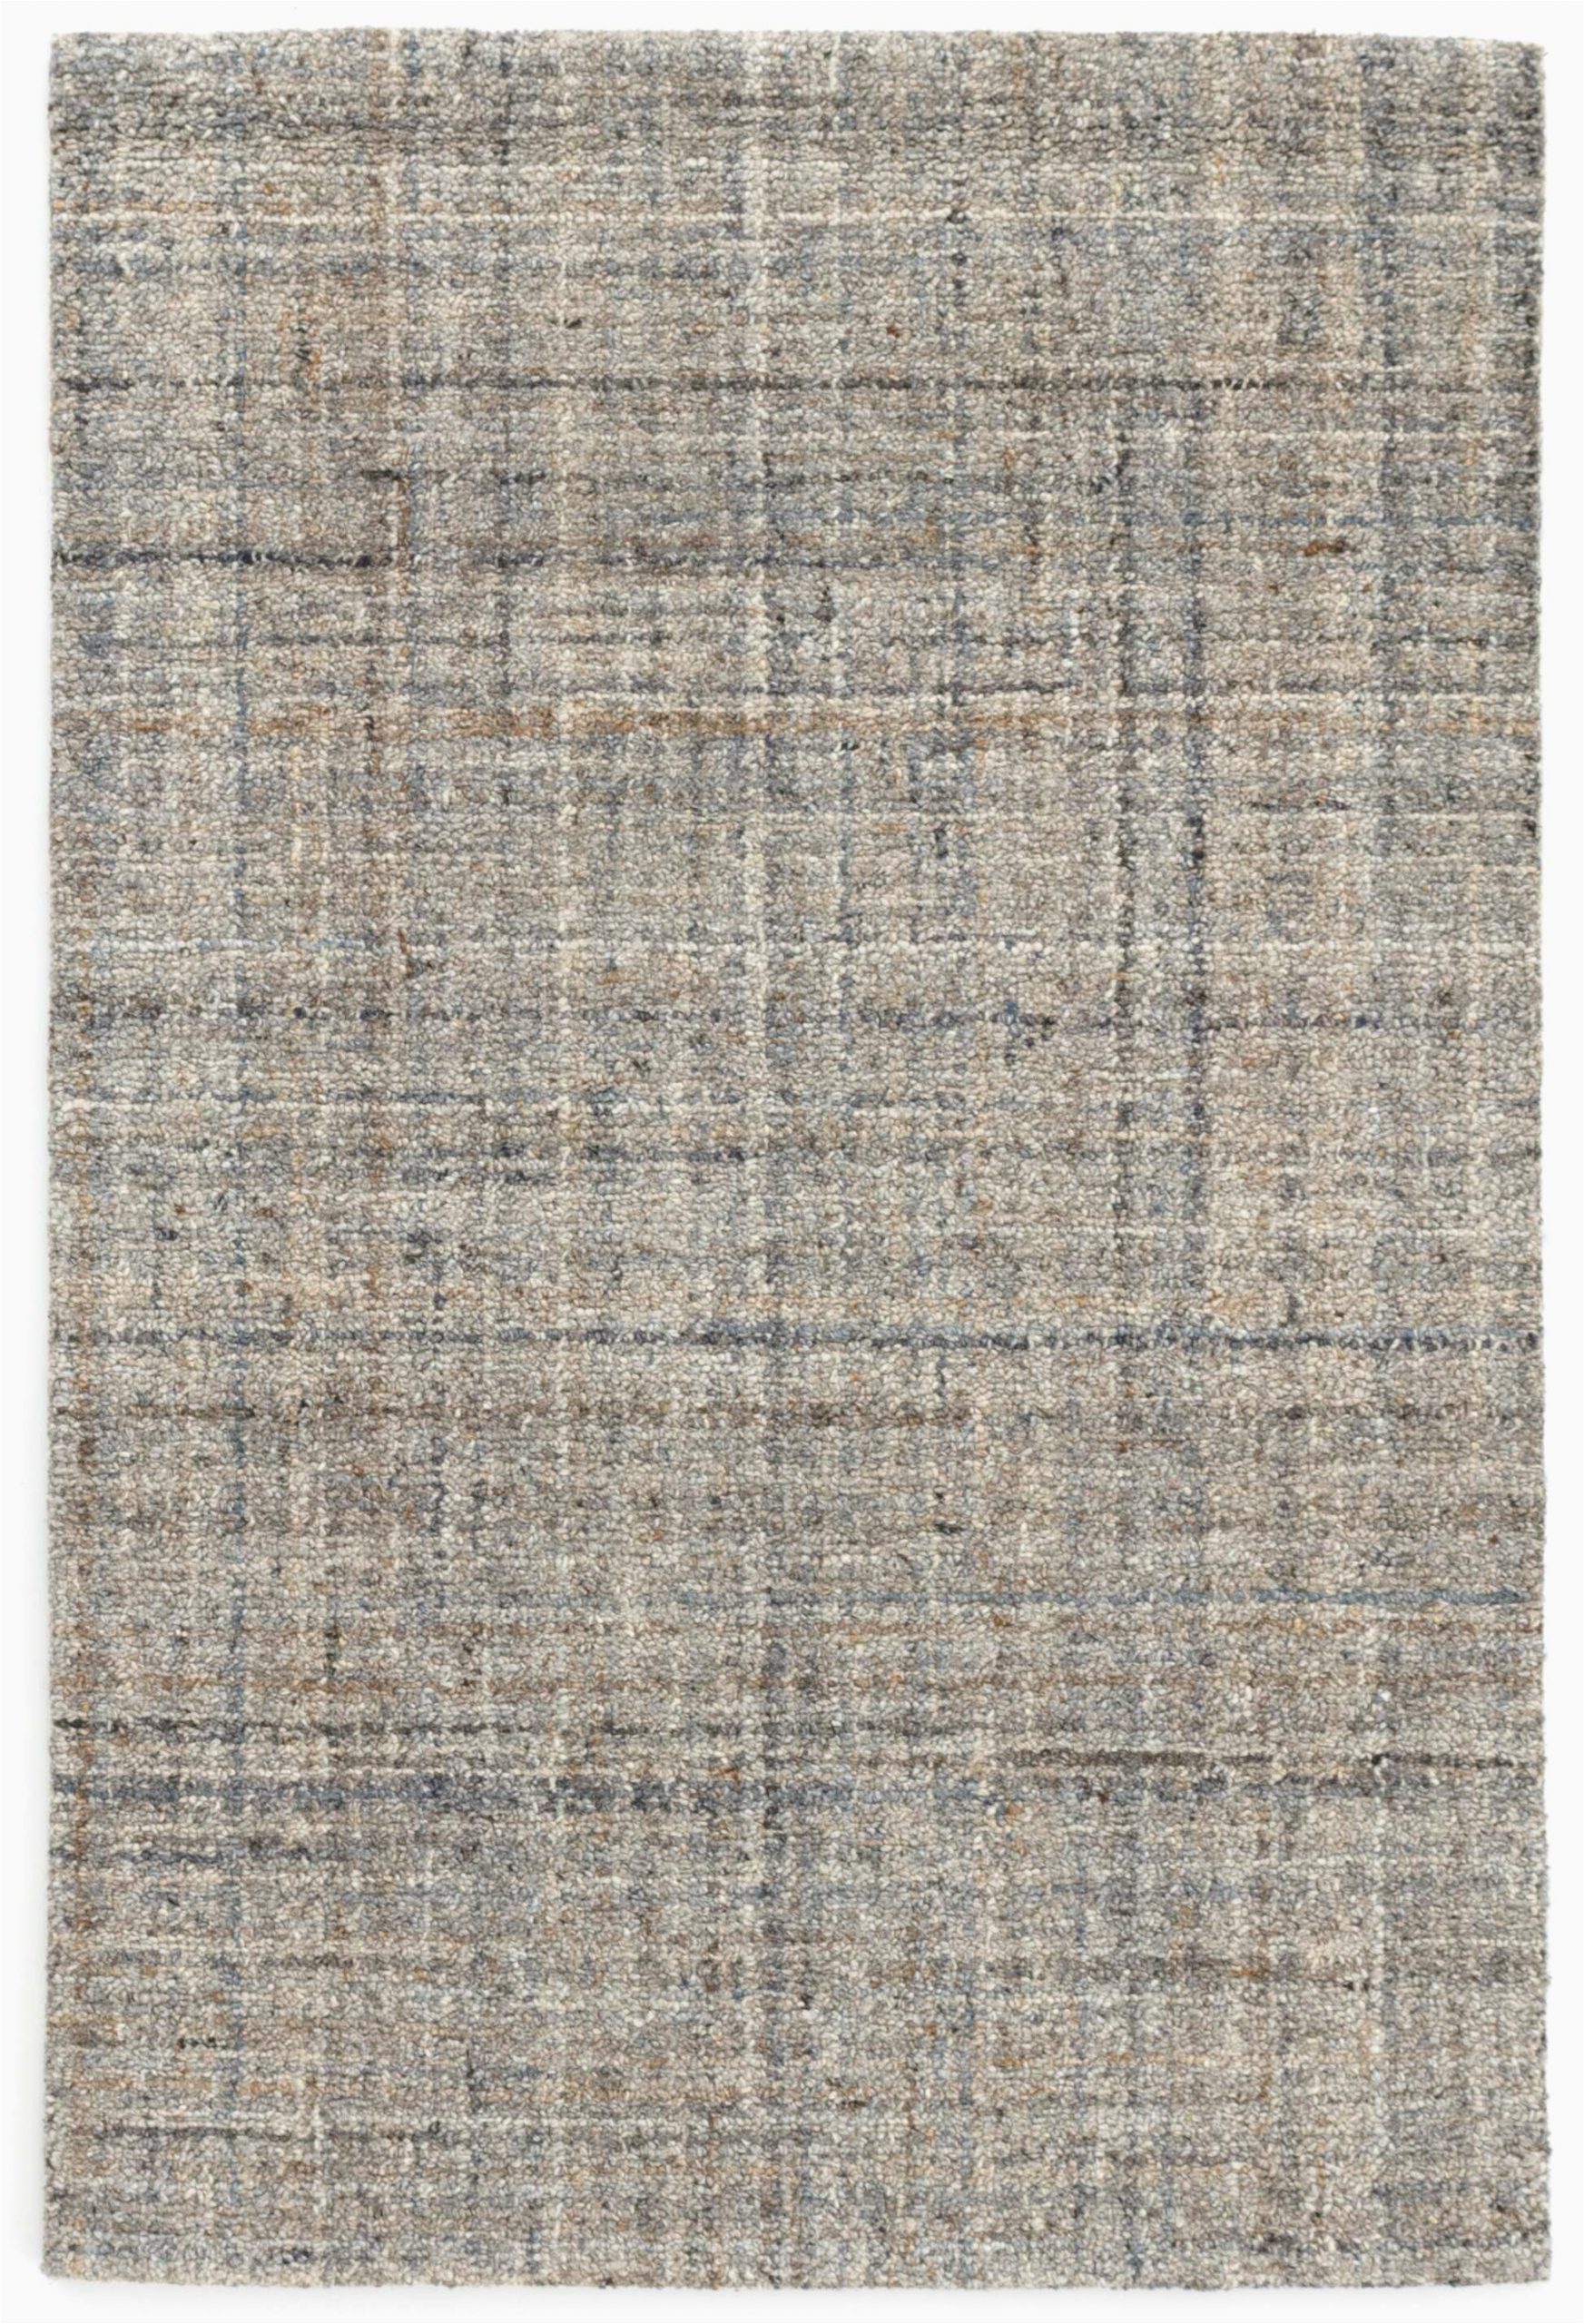 Brown Black and Gray area Rugs Harris Micro Hand Hooked Wool Gray Blue Black area Rug